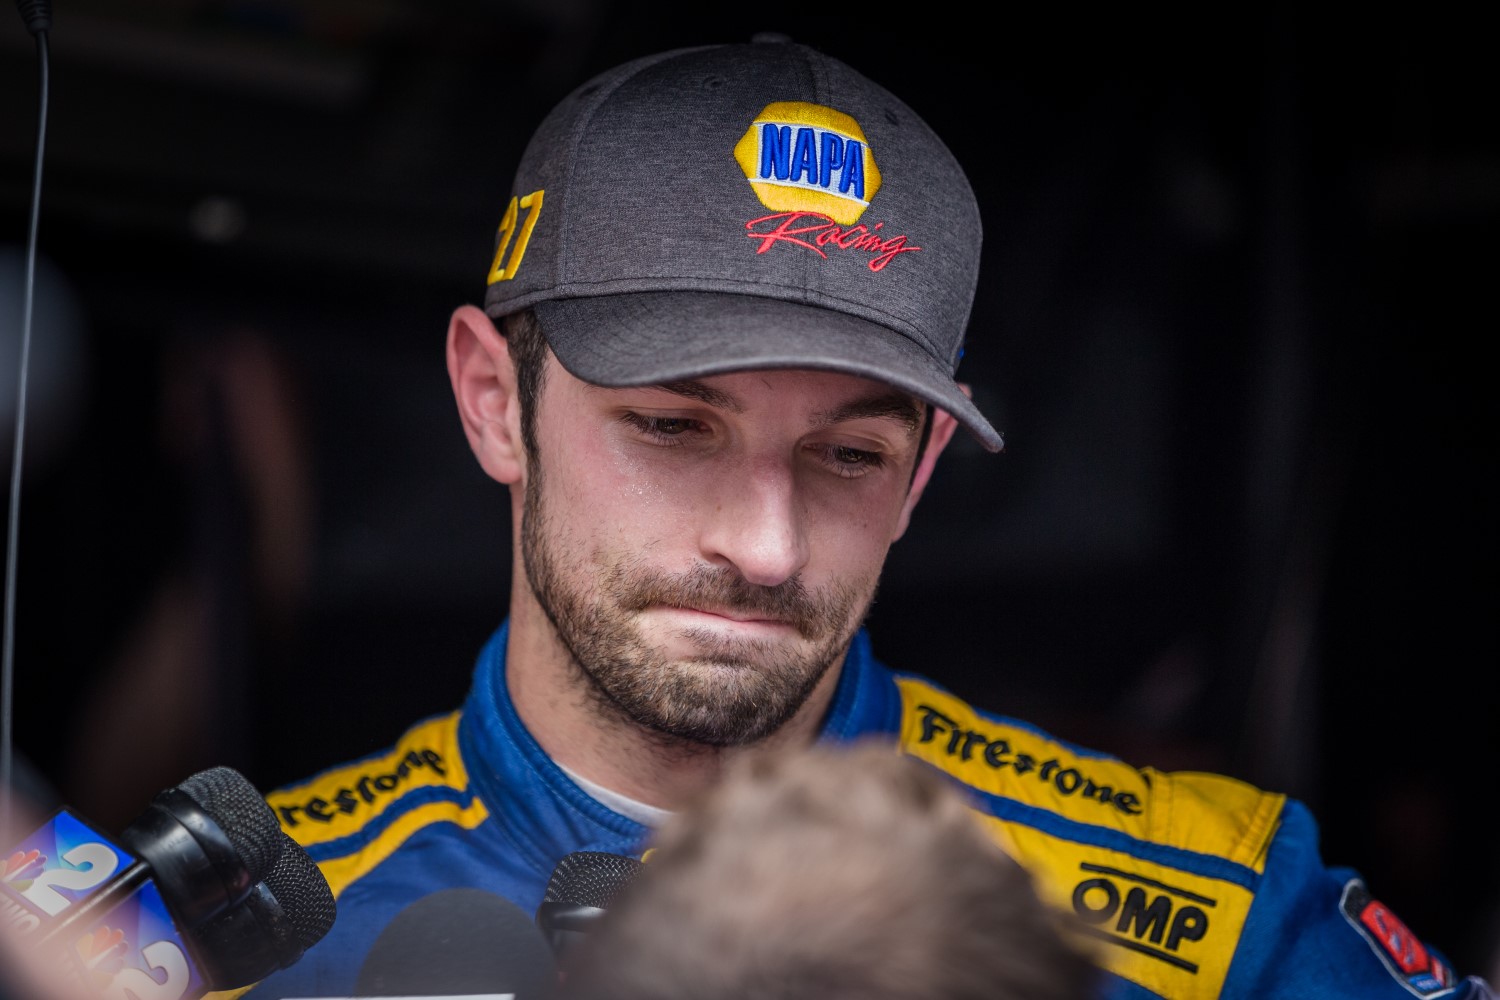 Rossi sad after getting beat by Team Penske at Indy. Will he regret not signing with the best team in IndyCar the rest of his career?